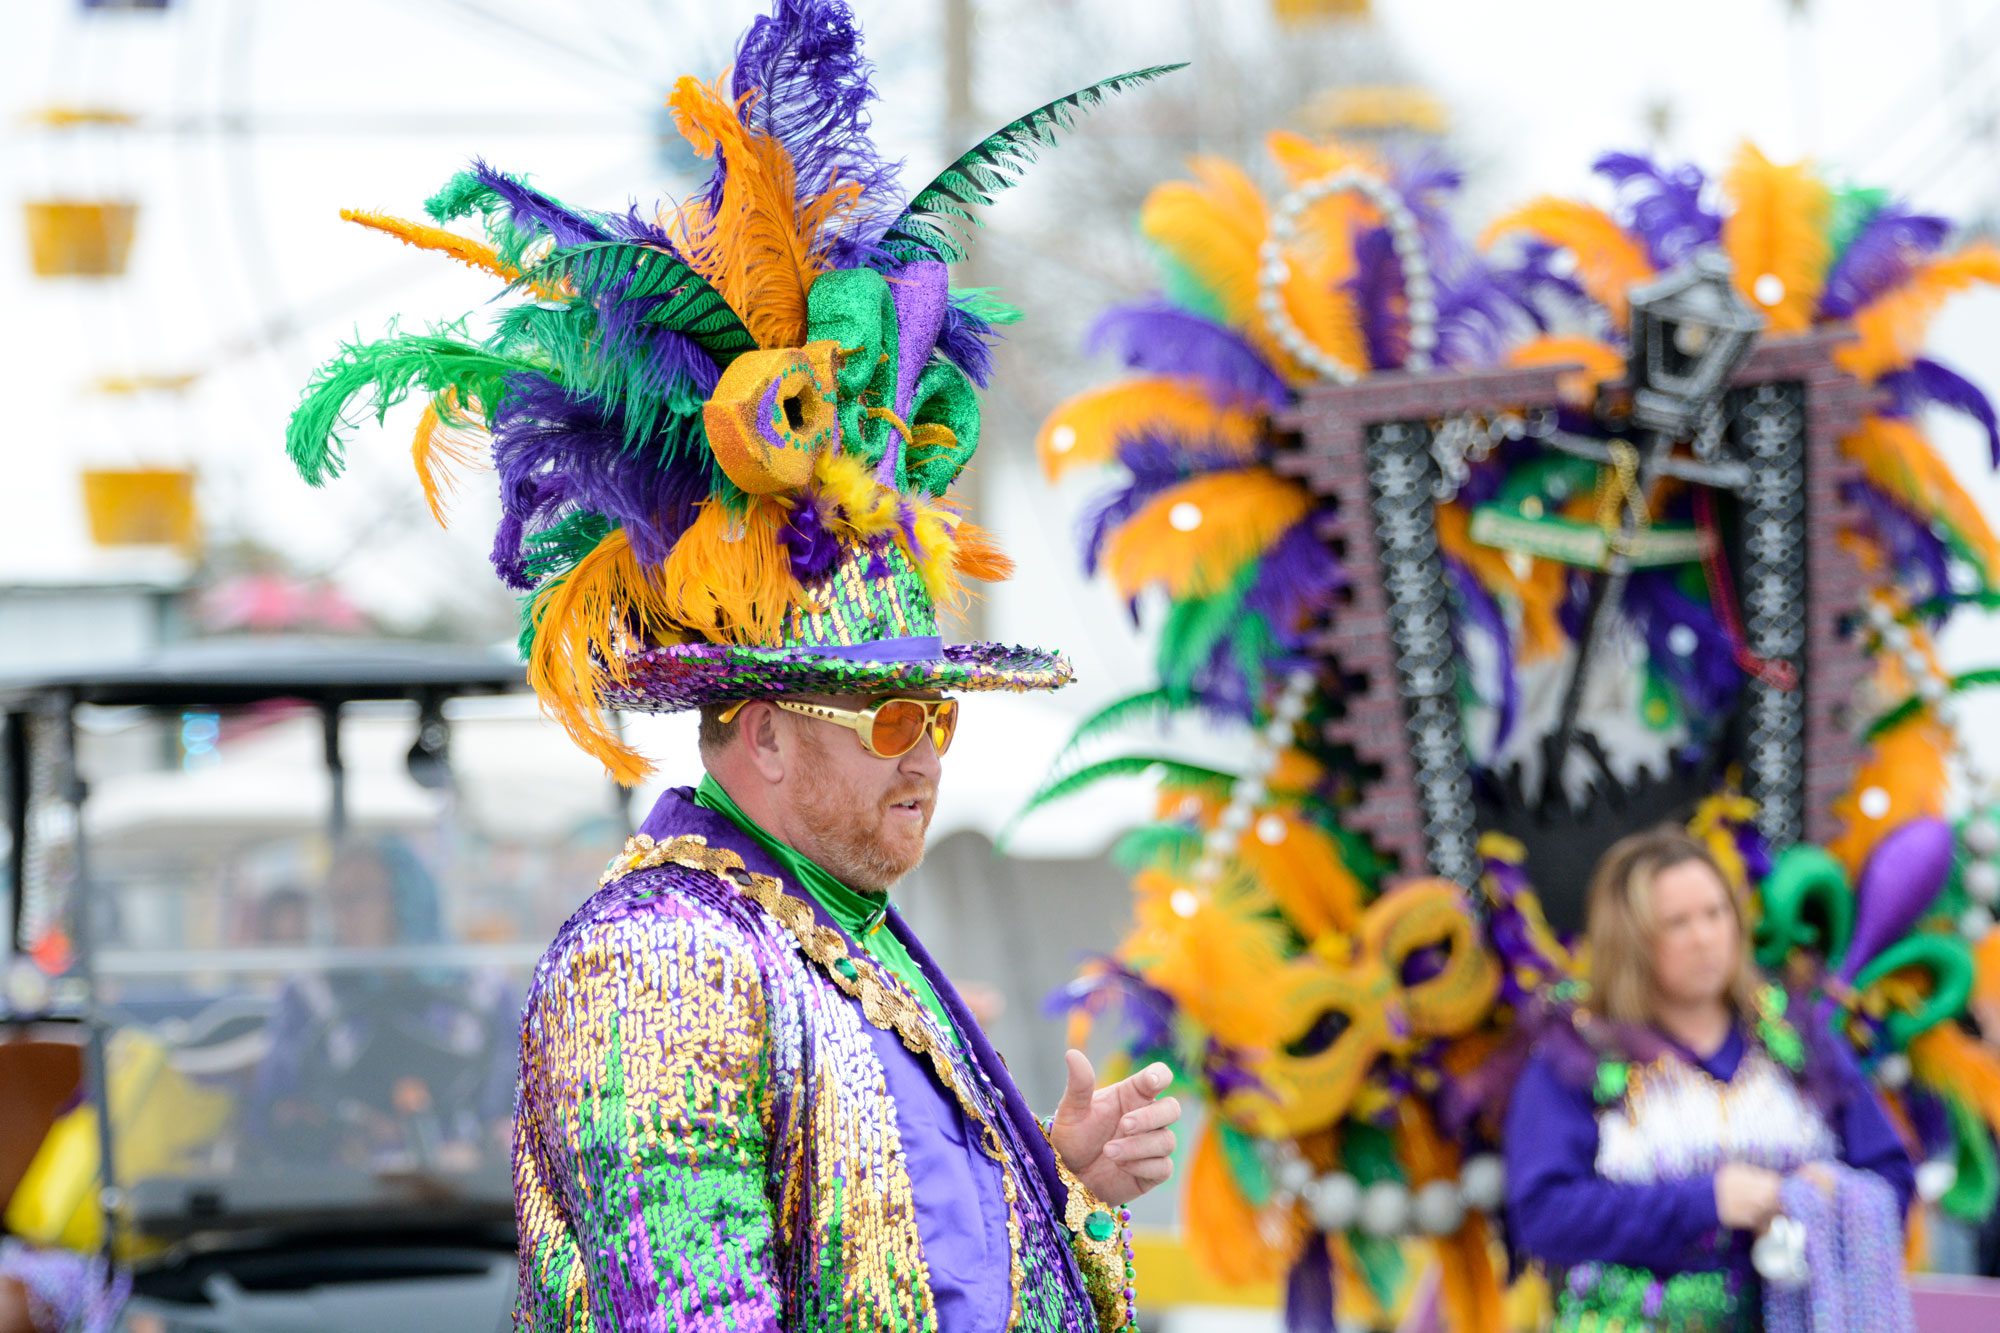 Man walking in a costumed parade handing out beads